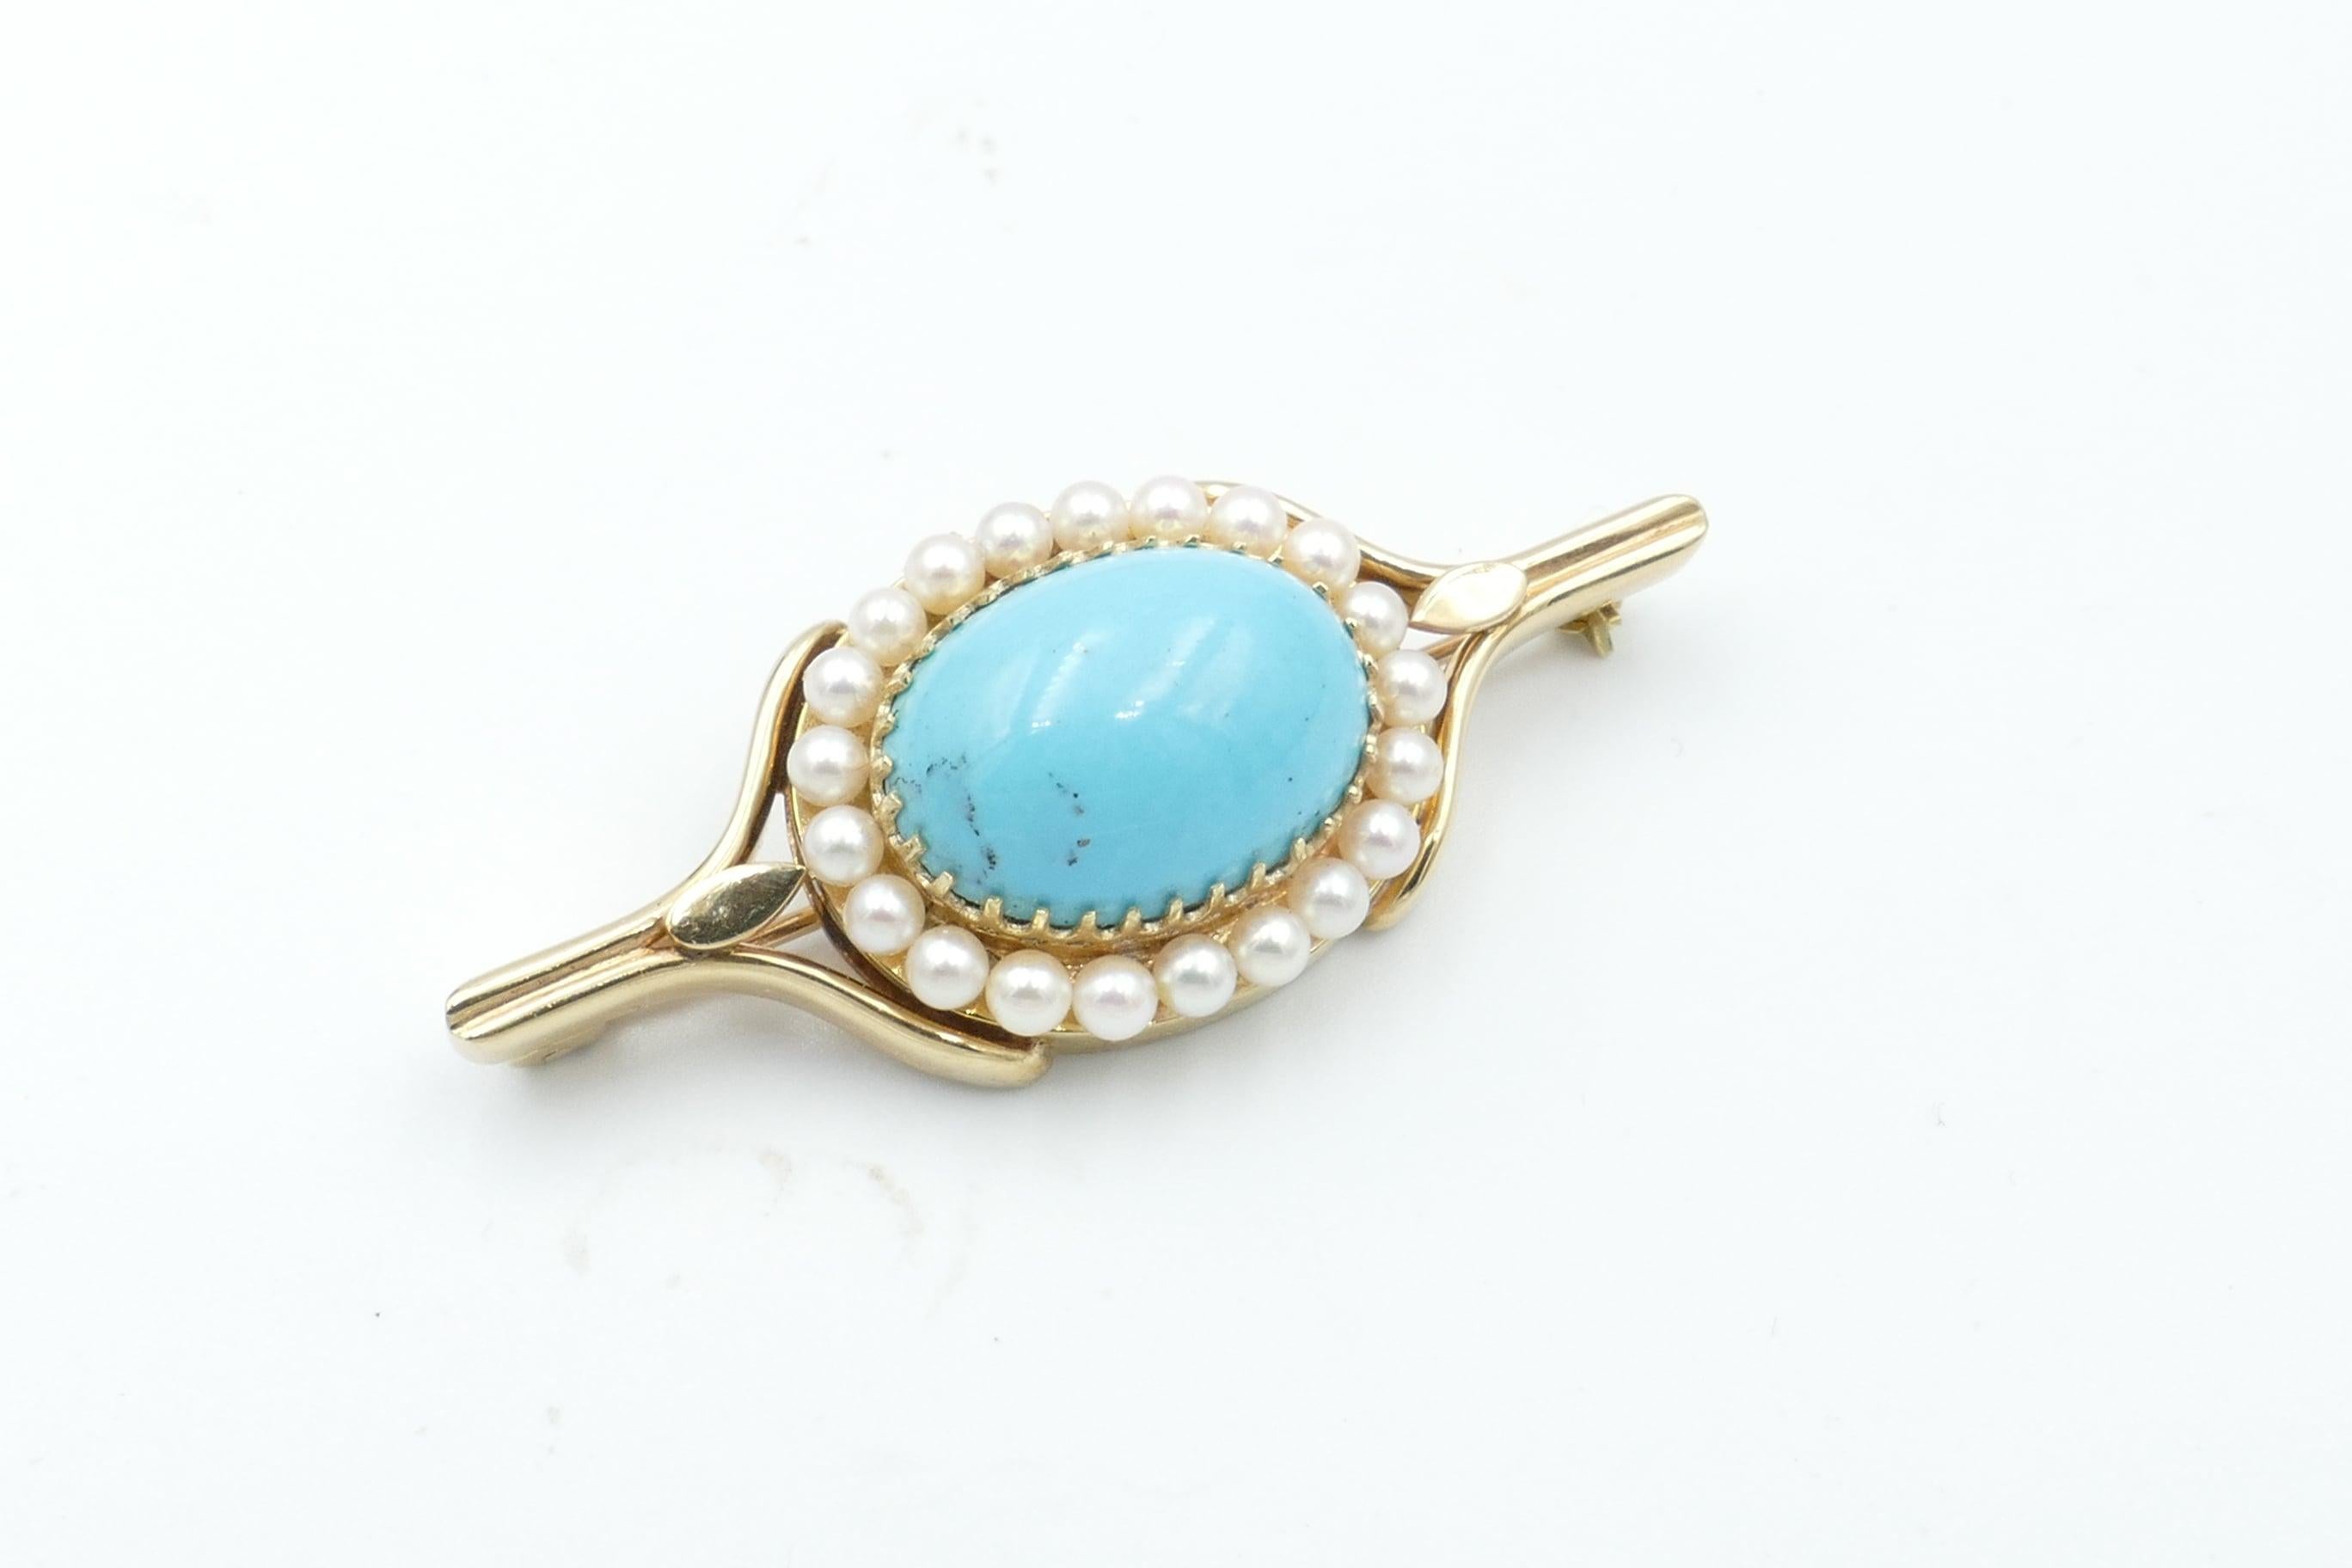 This high quality old Turquoise Sone is the Centrepiece of this lovely Antique Brooch.
It measures 17.42mm X 12.88mm X 6.23mm is oval cut,  light to mid blue in colour with only very minor matrix veins.
It is Oval Cabochon Cut, Multi Claw Set, and